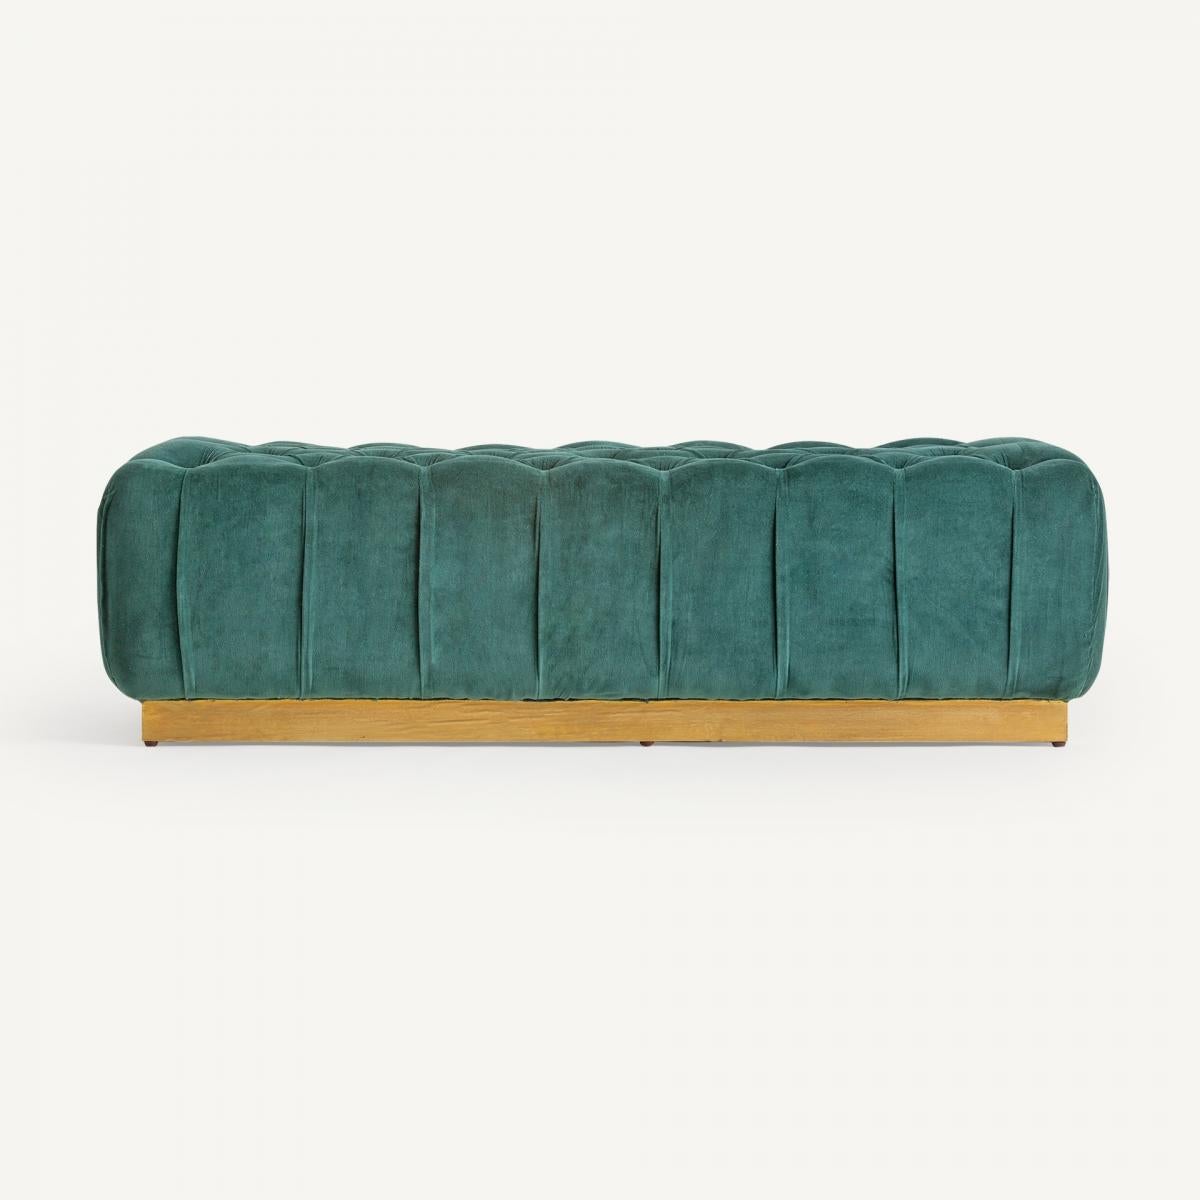 The deep buttoned bed foot stool in a emerald green color exudes shabby chic elegance. Crafted from solid wood, it harmoniously blends durability and sophistication. Its soft velvet upholstery, adorned with button detailing, adds a touch of luxury.